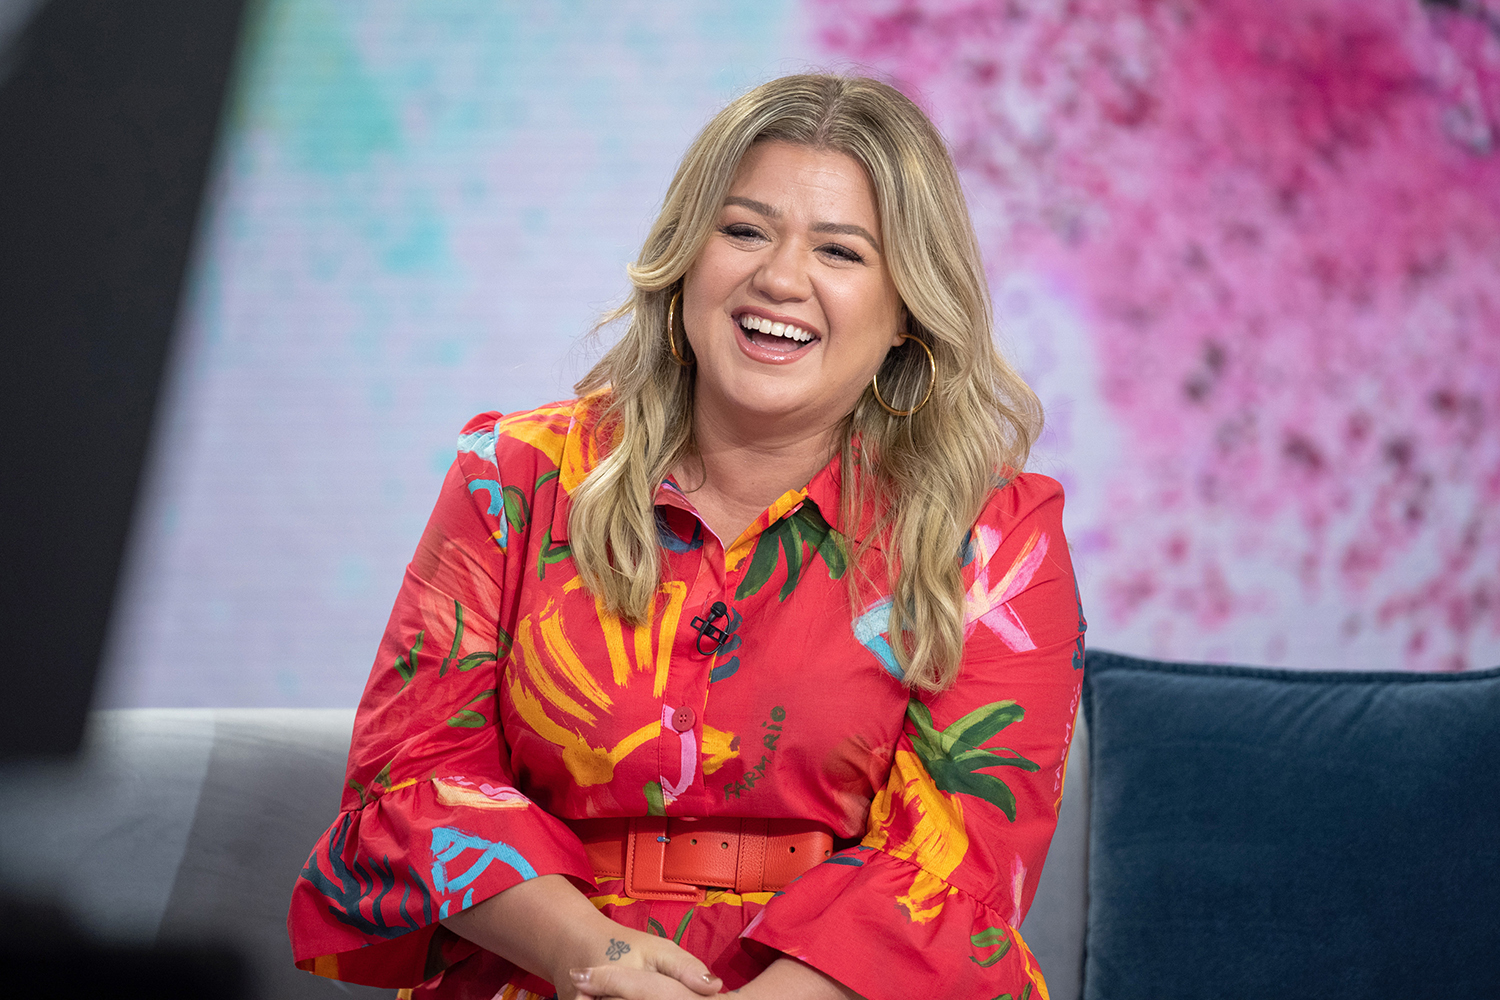 Kelly Clarkson, who left The Voice ahead of season 22, addressed her departure